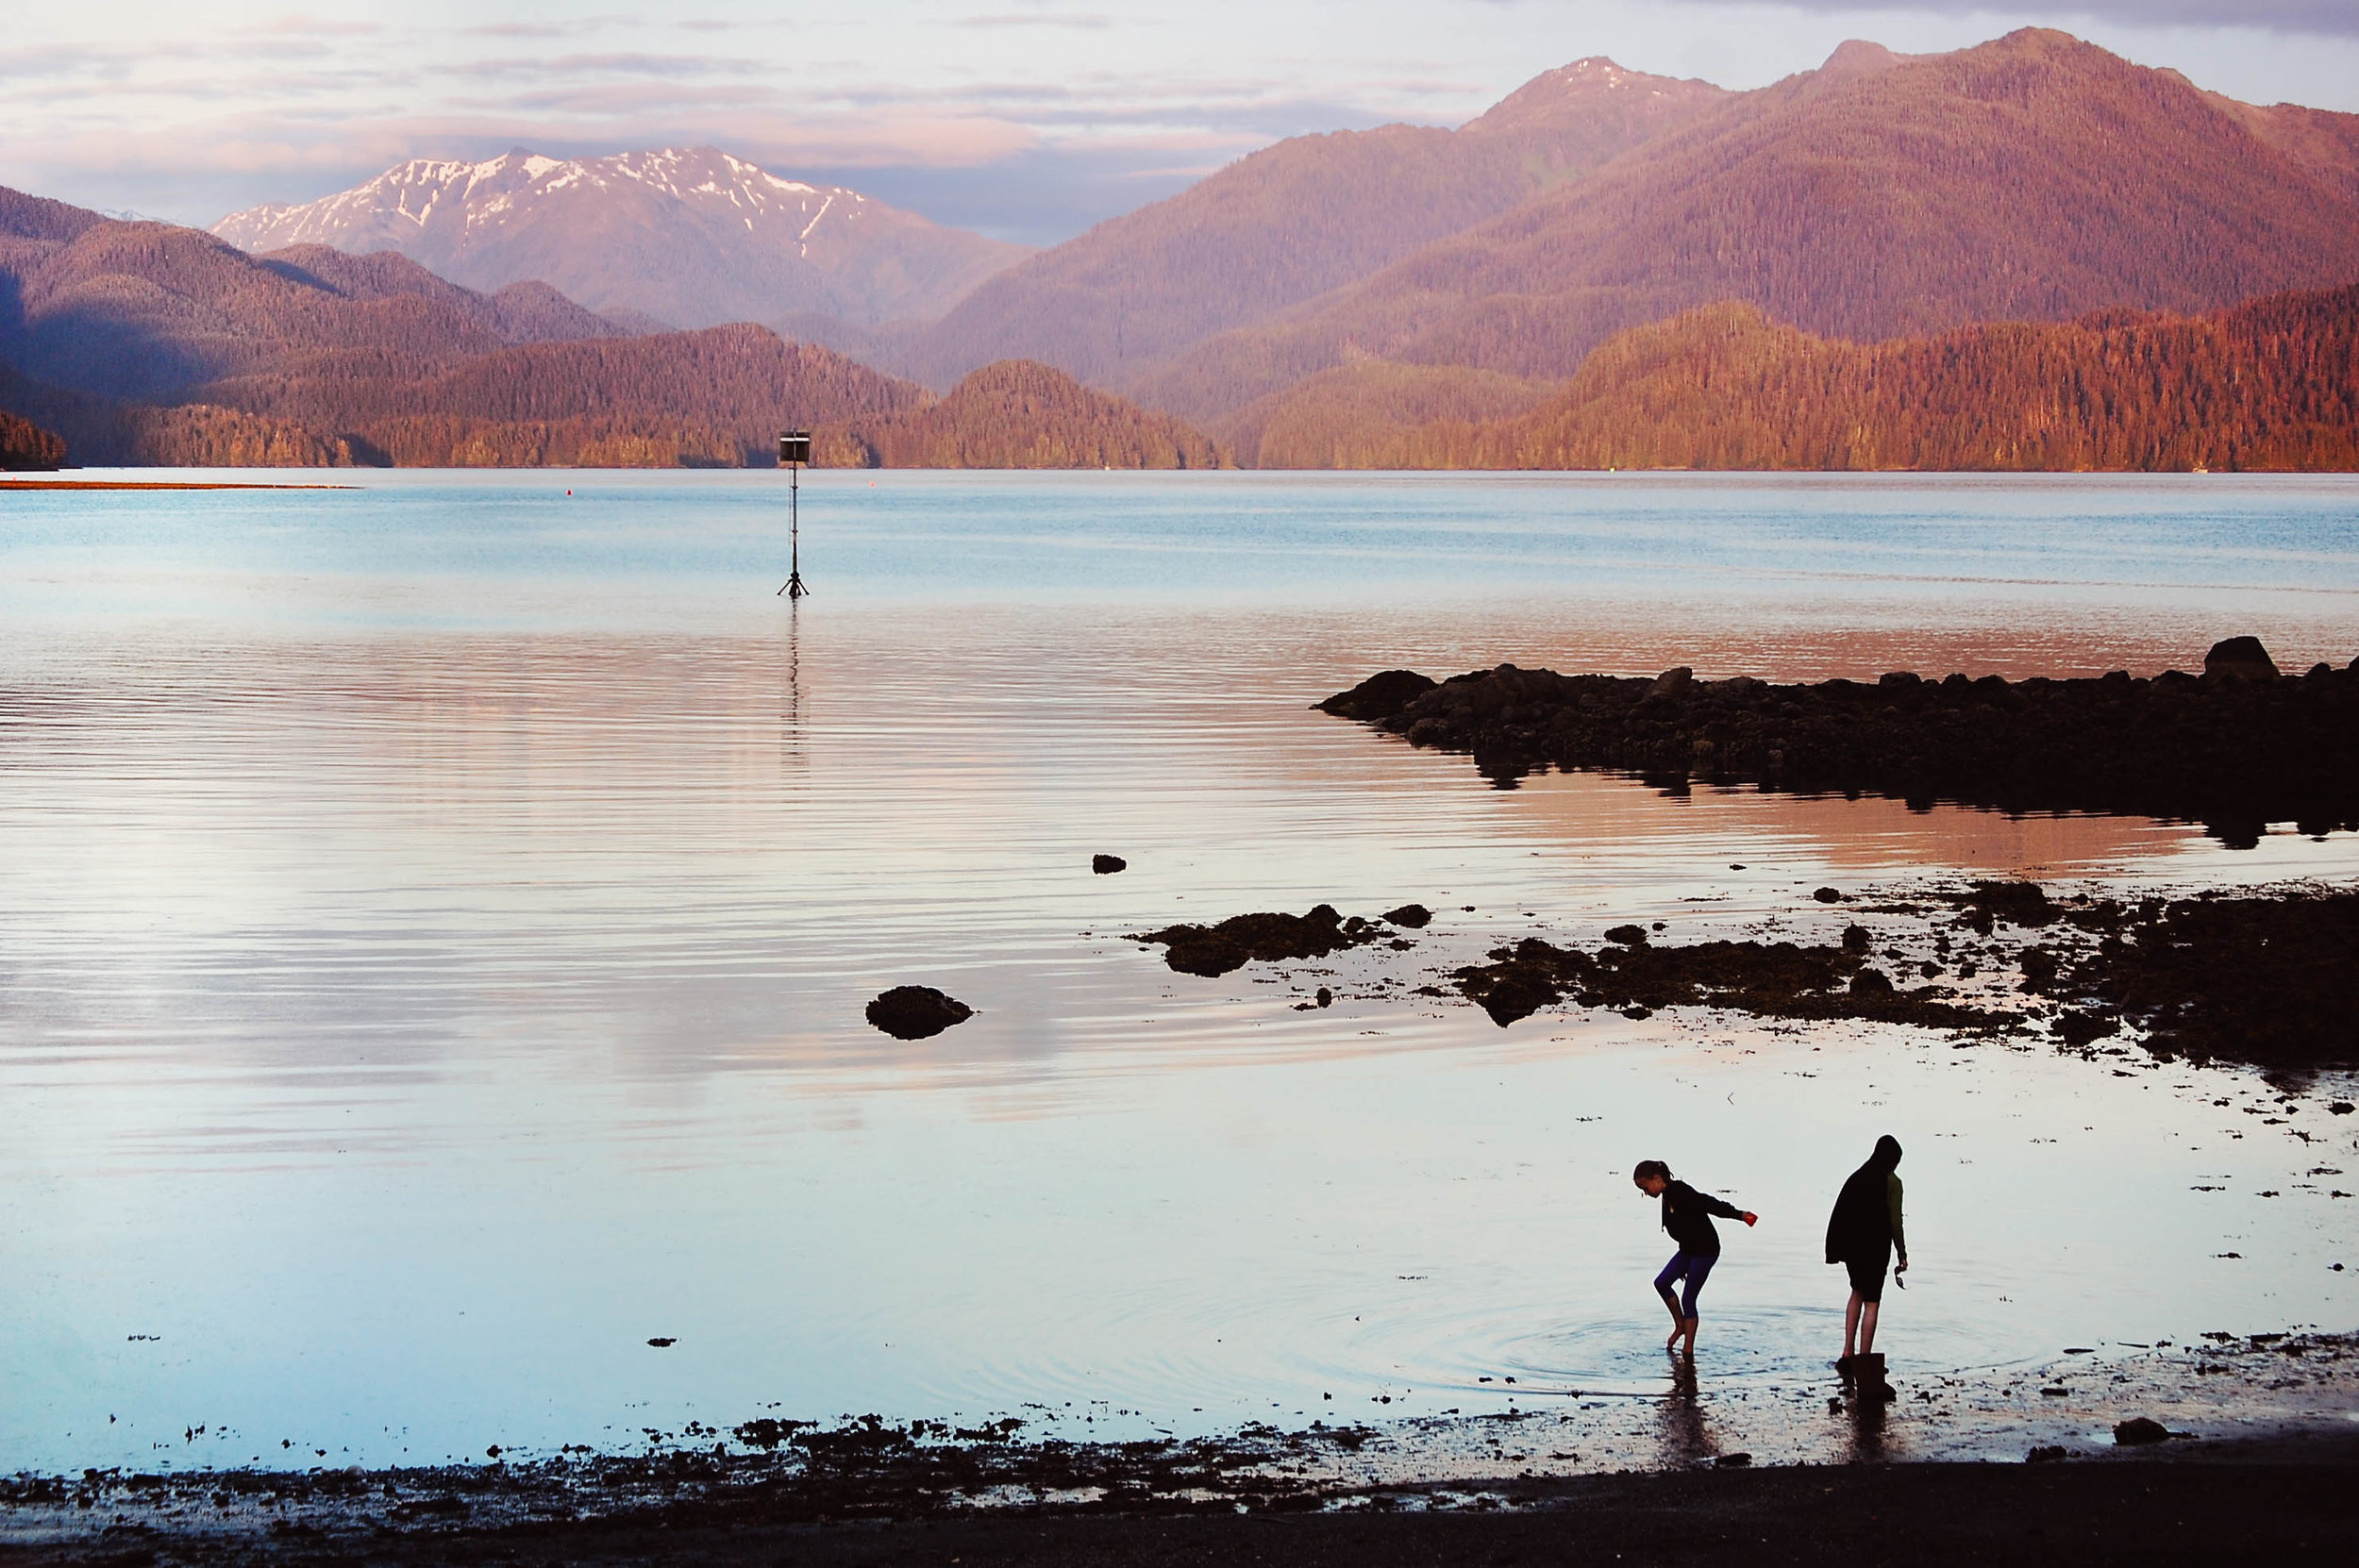  Children play on the beach in Sitka on the summer solstice 